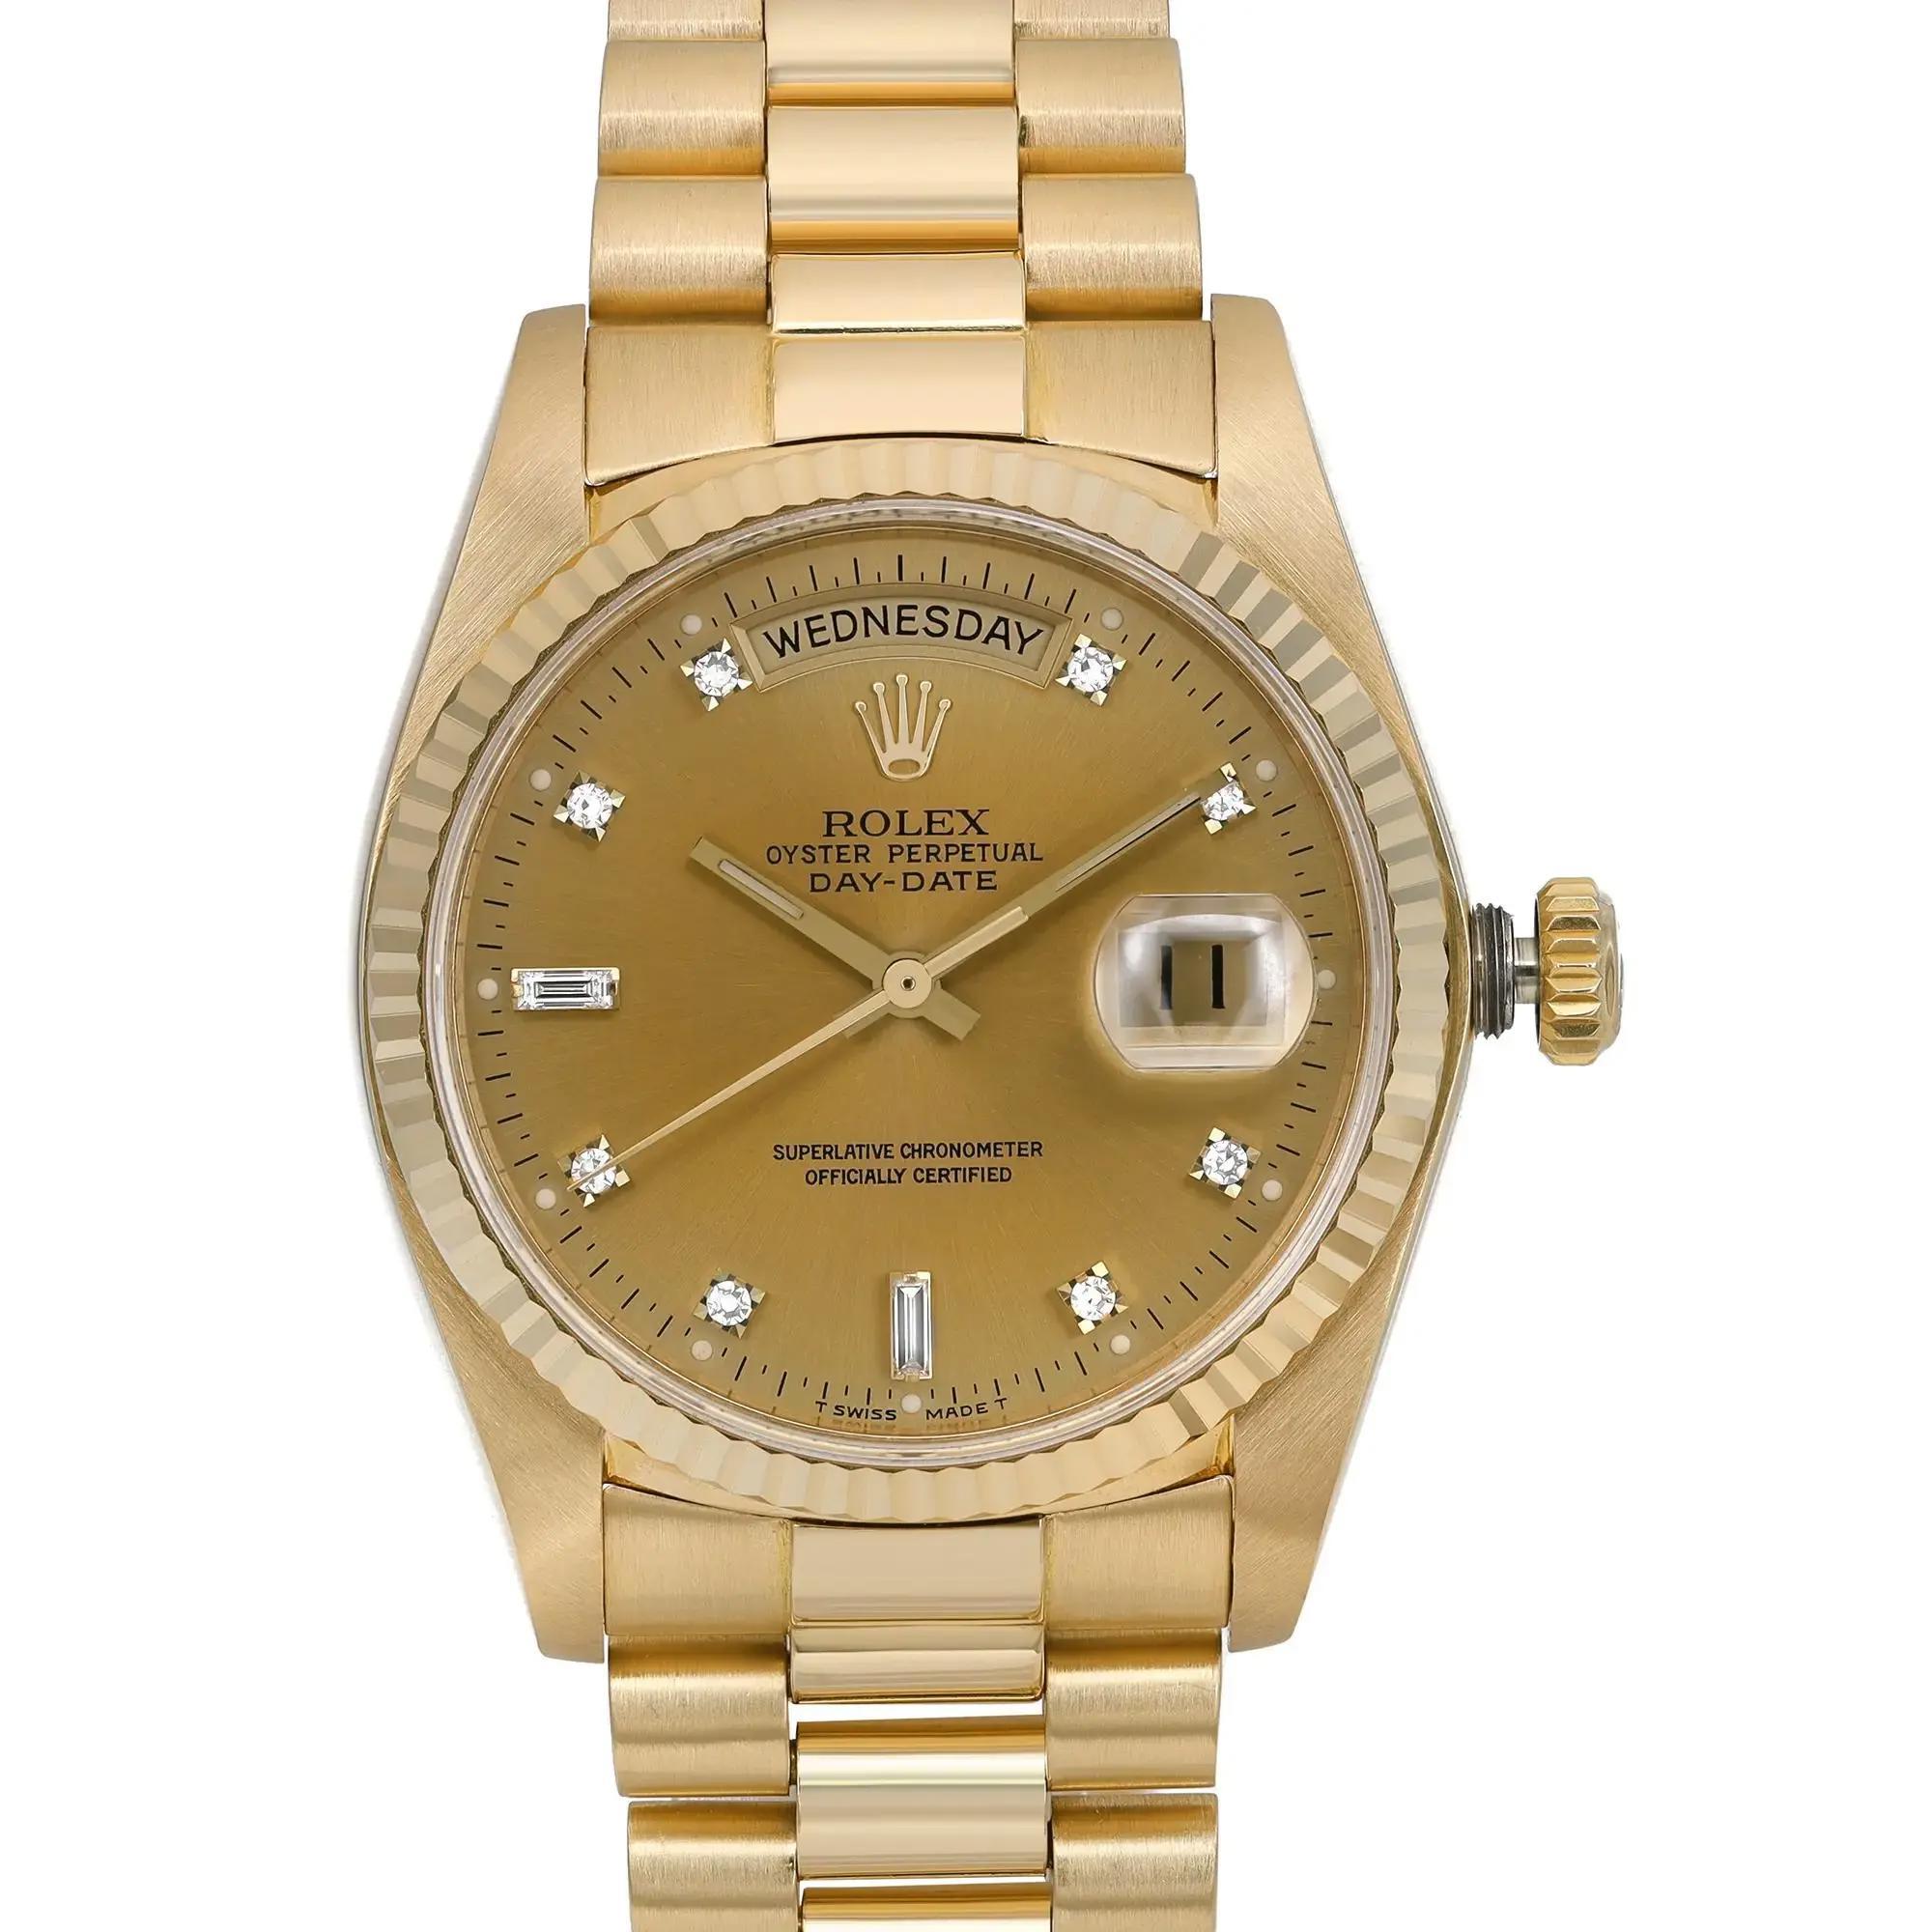 Pre-owned. Good condition. The watch was produced in 1984. It comes with a Rolex box but no papers.

* Free Shipping within the USA
* Two-year warranty coverage
* 14-day return policy with a full refund. Buyers can verify the watch's authenticity at